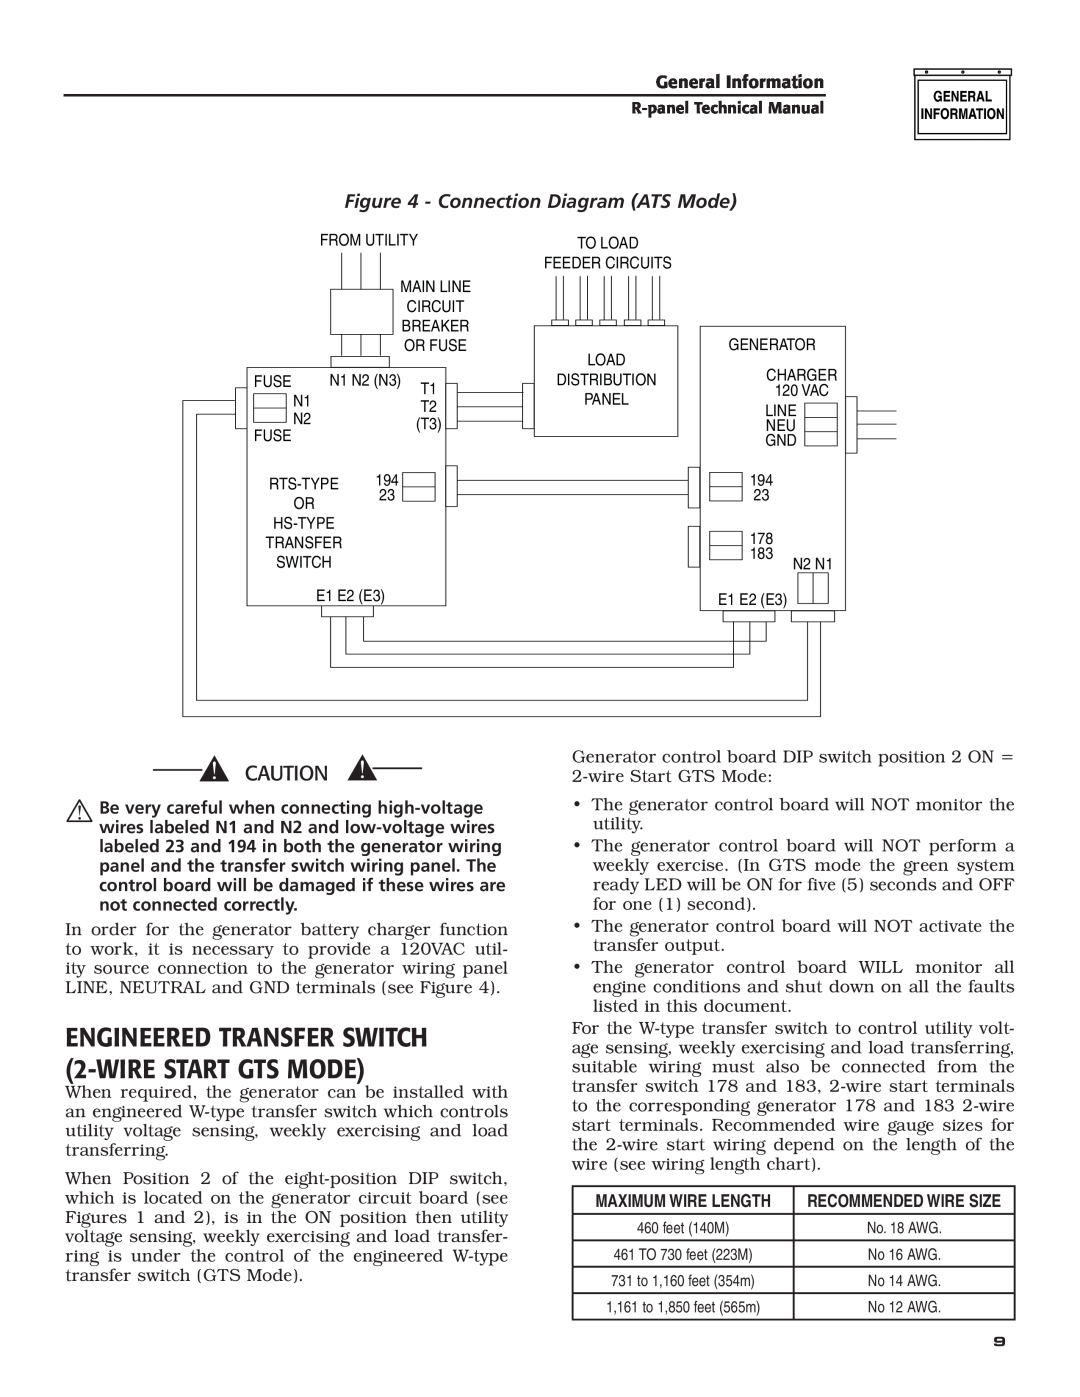 Generac Power Systems R-200A technical manual ENGINEERED TRANSFER SWITCH 2-WIRE START GTS MODE, Connection Diagram ATS Mode 